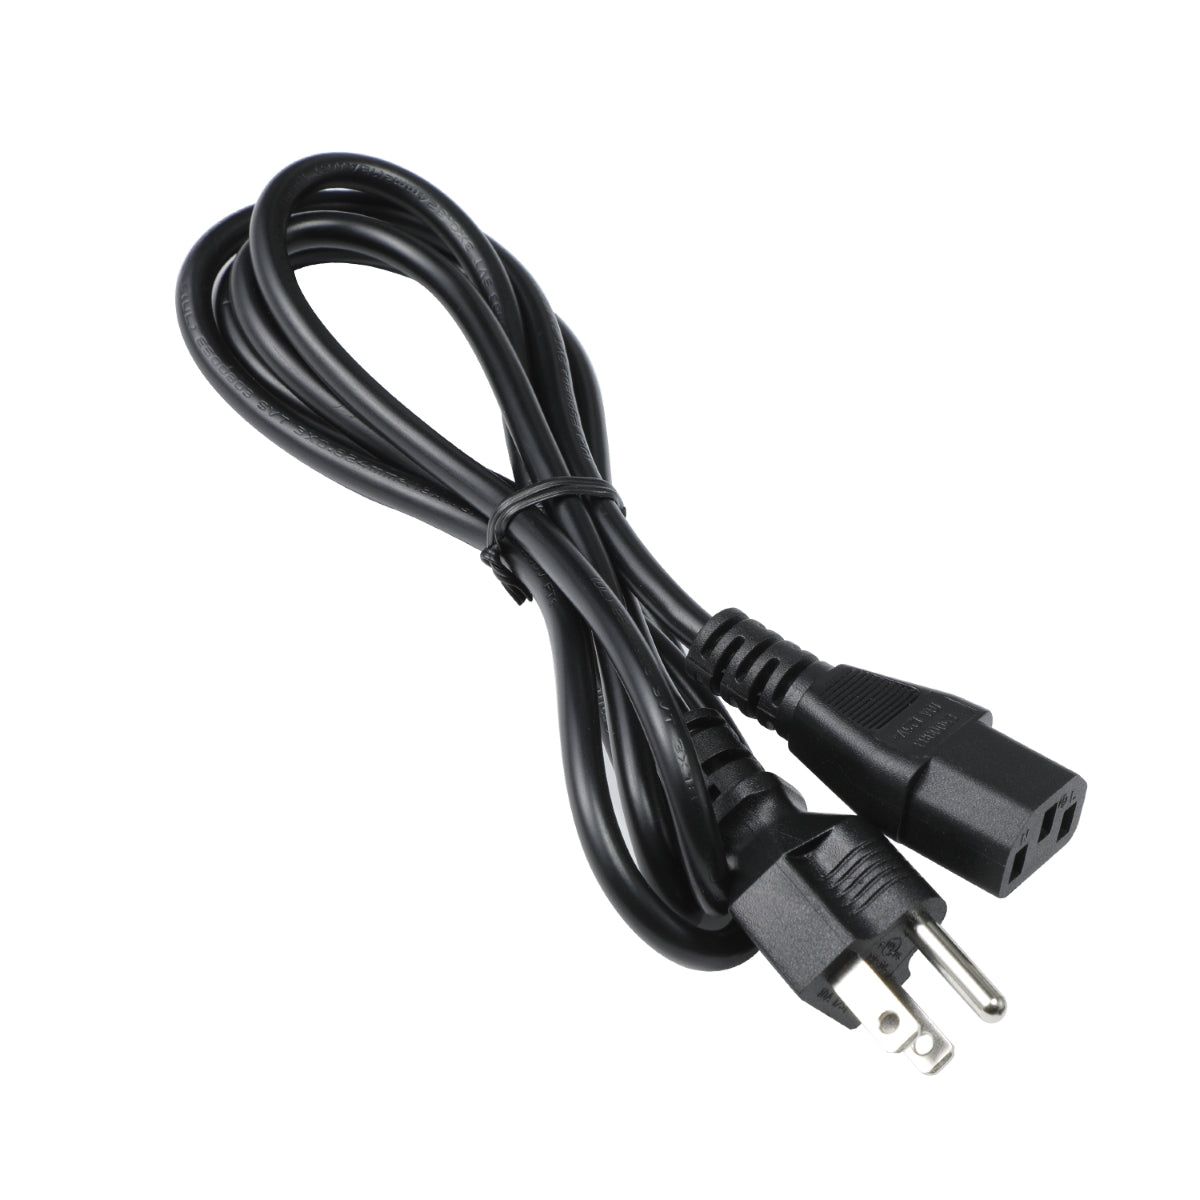 Power Cord for HP 24o 24-inch Monitor